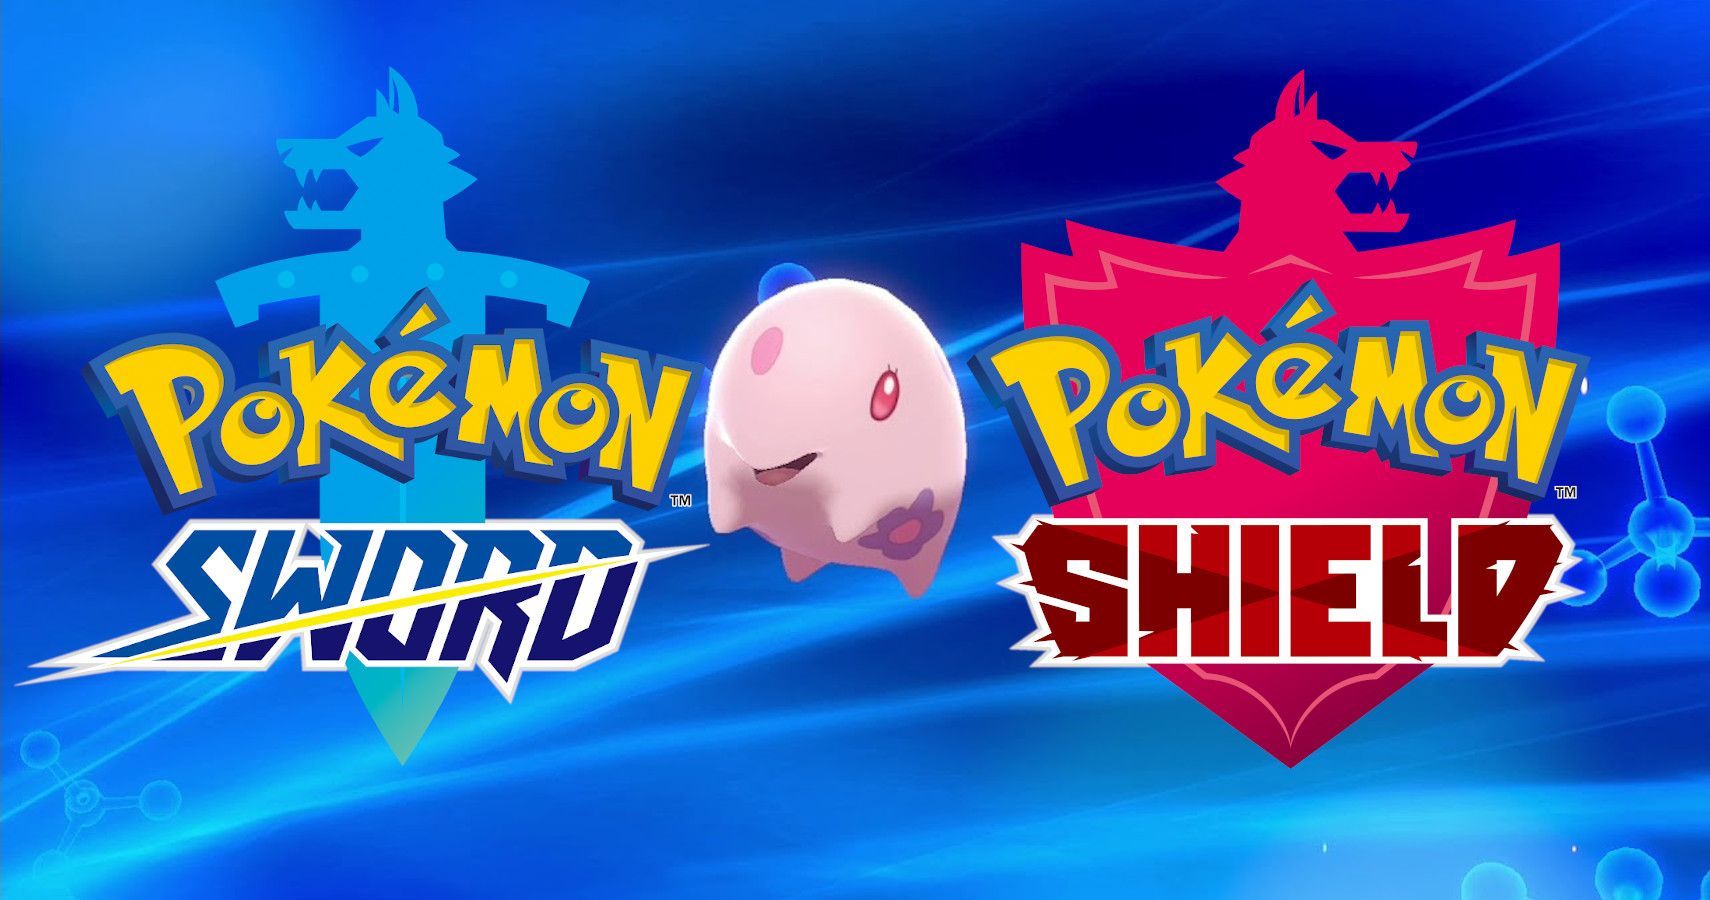 How To Evolve Munna In Pokemon Sword And Shield